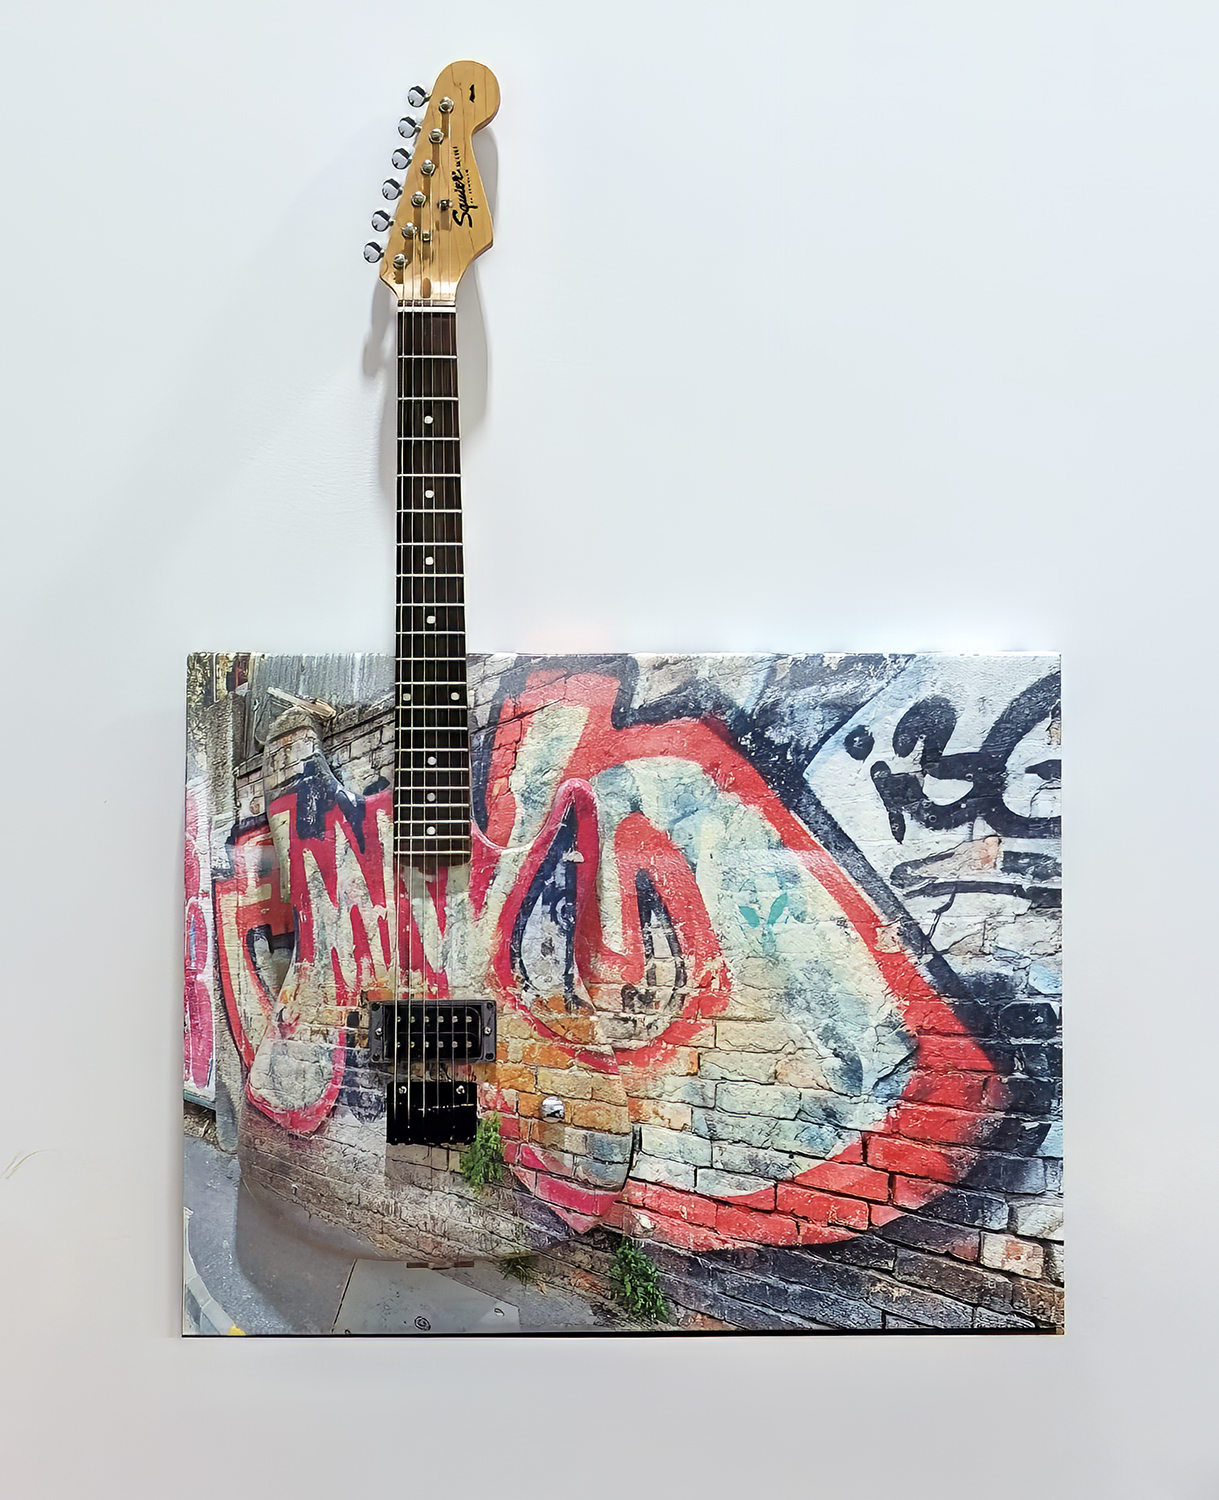 The Art of Guitar is Jim Cara's groundbreaking integration of actual removable guitars seamlessly blended into iconic pop culture wall art hangings. Each piece showcases the visual guitar special effects, lighting, and animation techniques that have made Jim Cara the keeper of the grail in his arena.